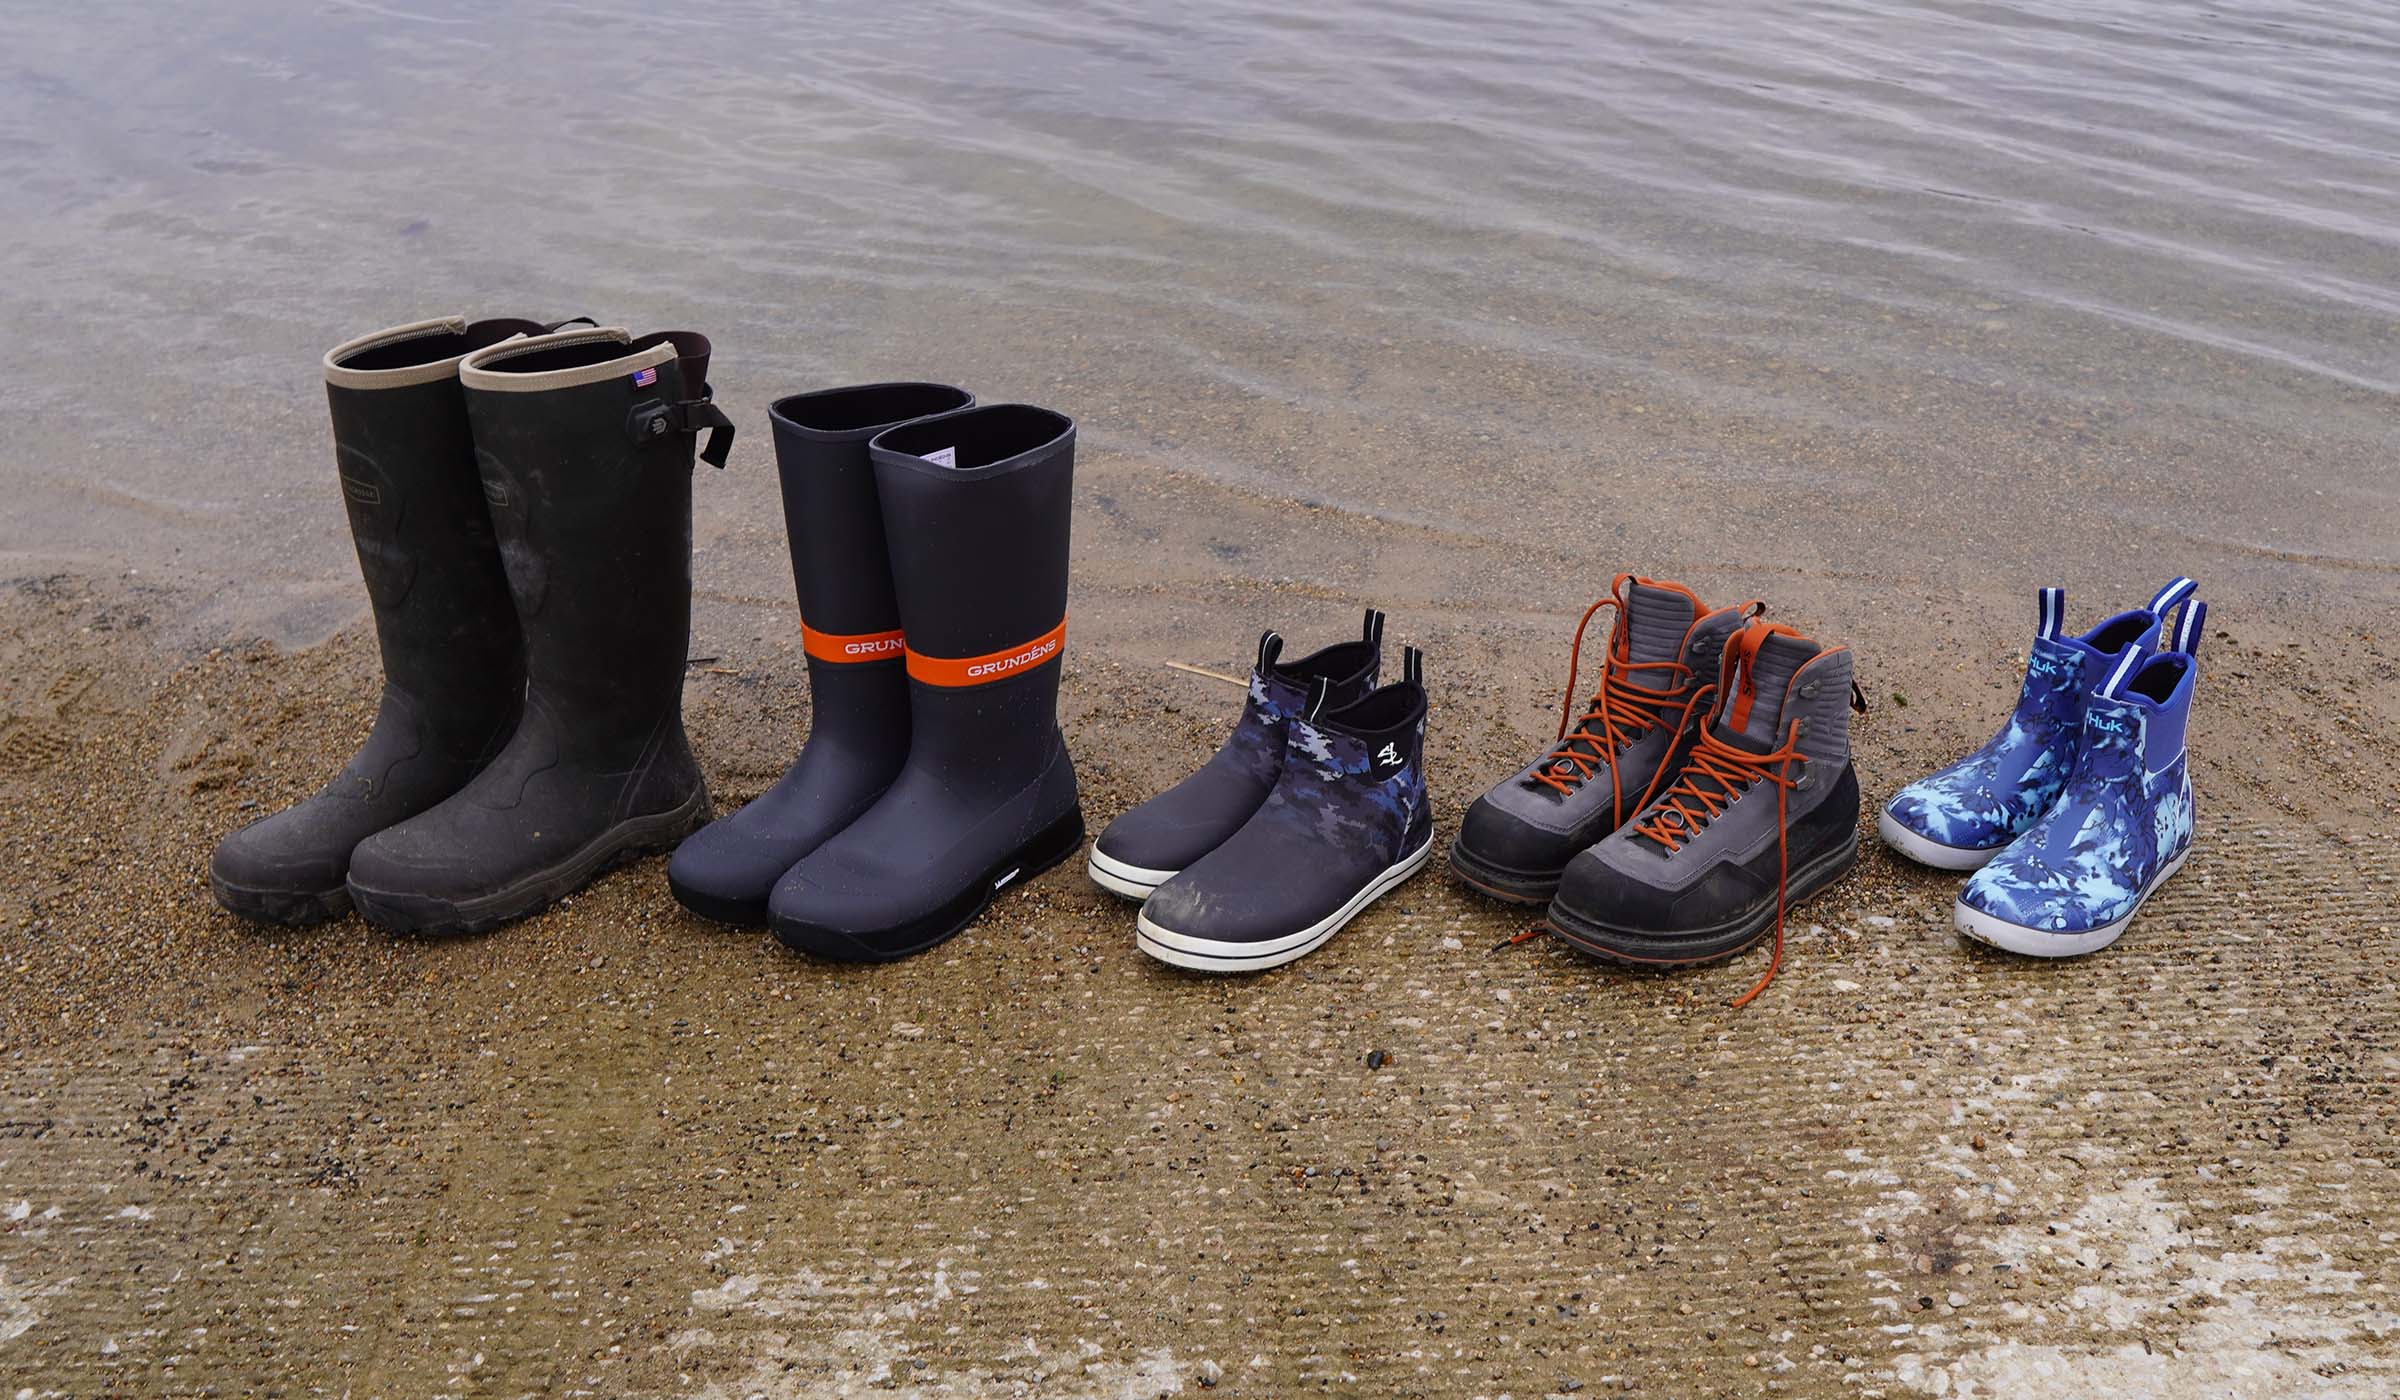 Best fishing boots ever? Tahma passes military slip-resistant test and  exceed fishermen comfort